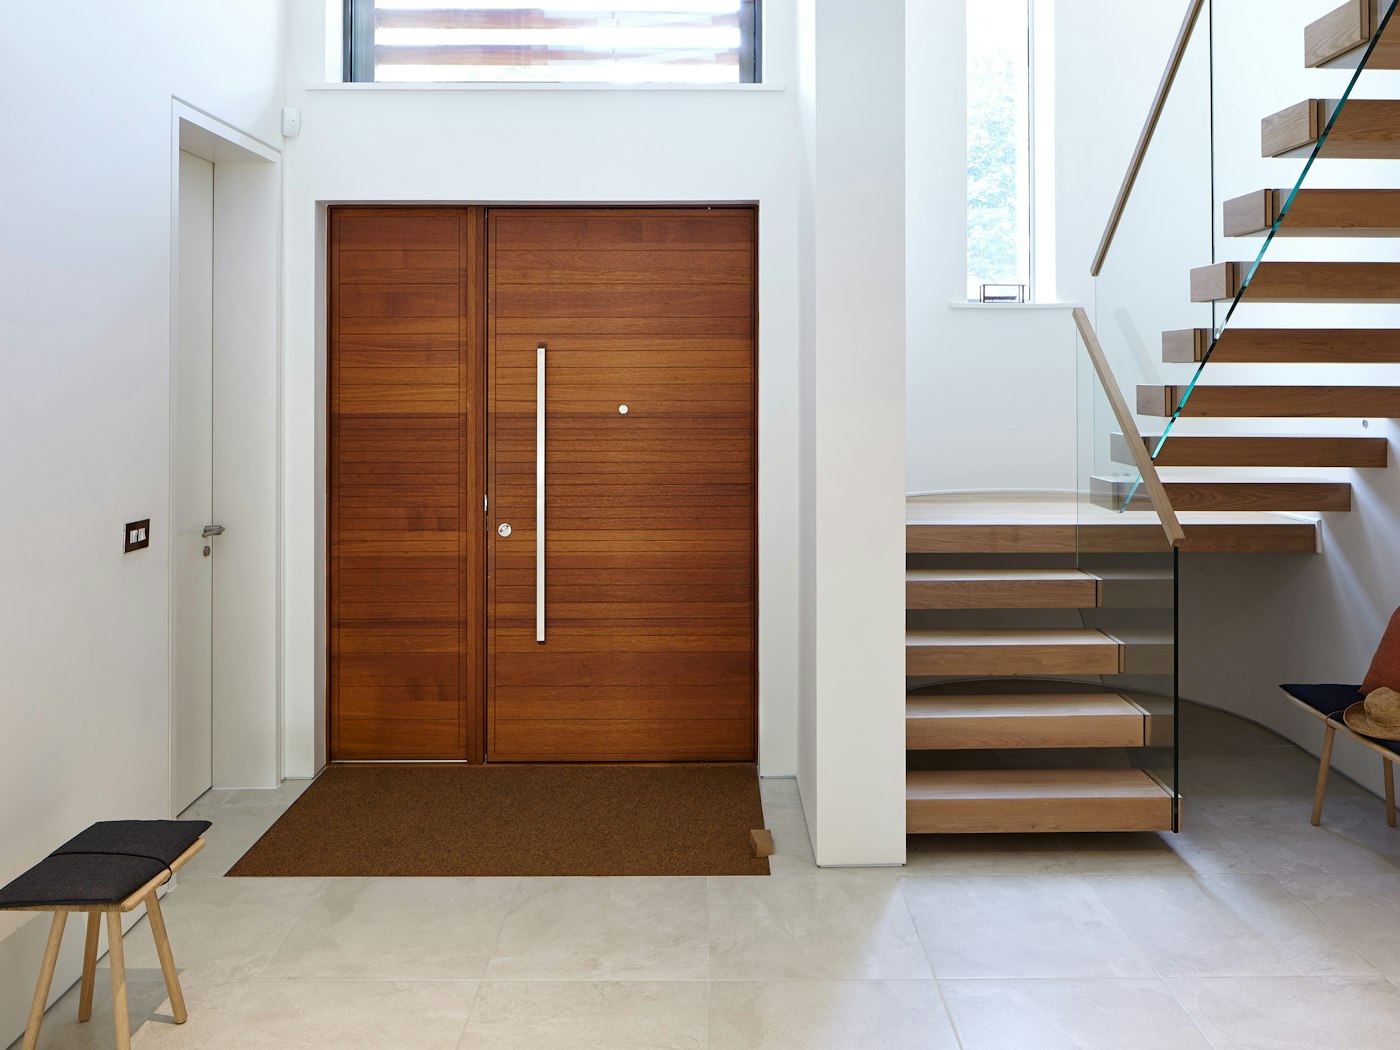 The contemporary front door is matched by the modern interior